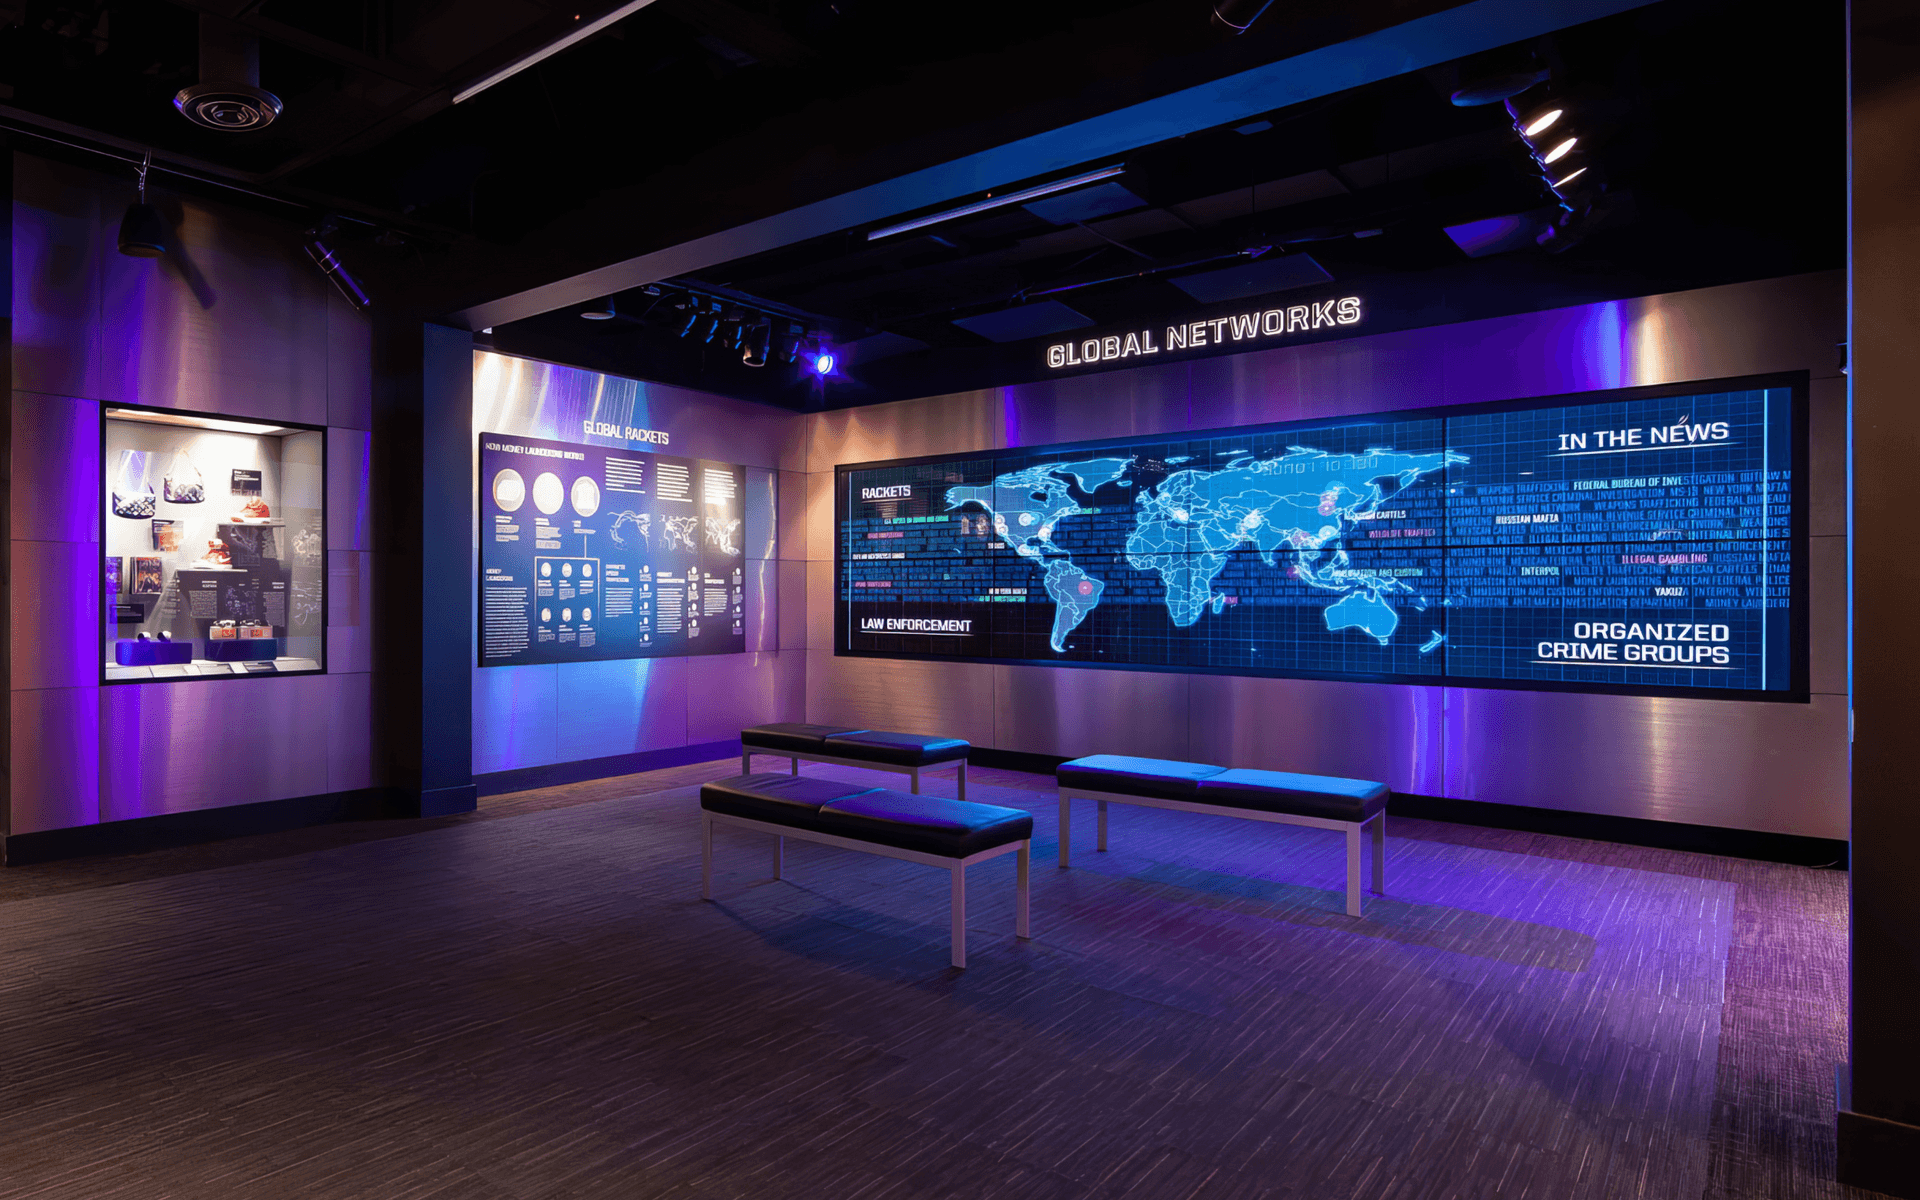 An exhibit room at The Mob Museum. Shiny metallic walls reflect dim blue and purple lighting. Three benches are arranged in front of a large video screen displaying a world map, with the title Global Networks above it on the wall. A smaller screen to the left is titled Global Rackets and displays charts and text